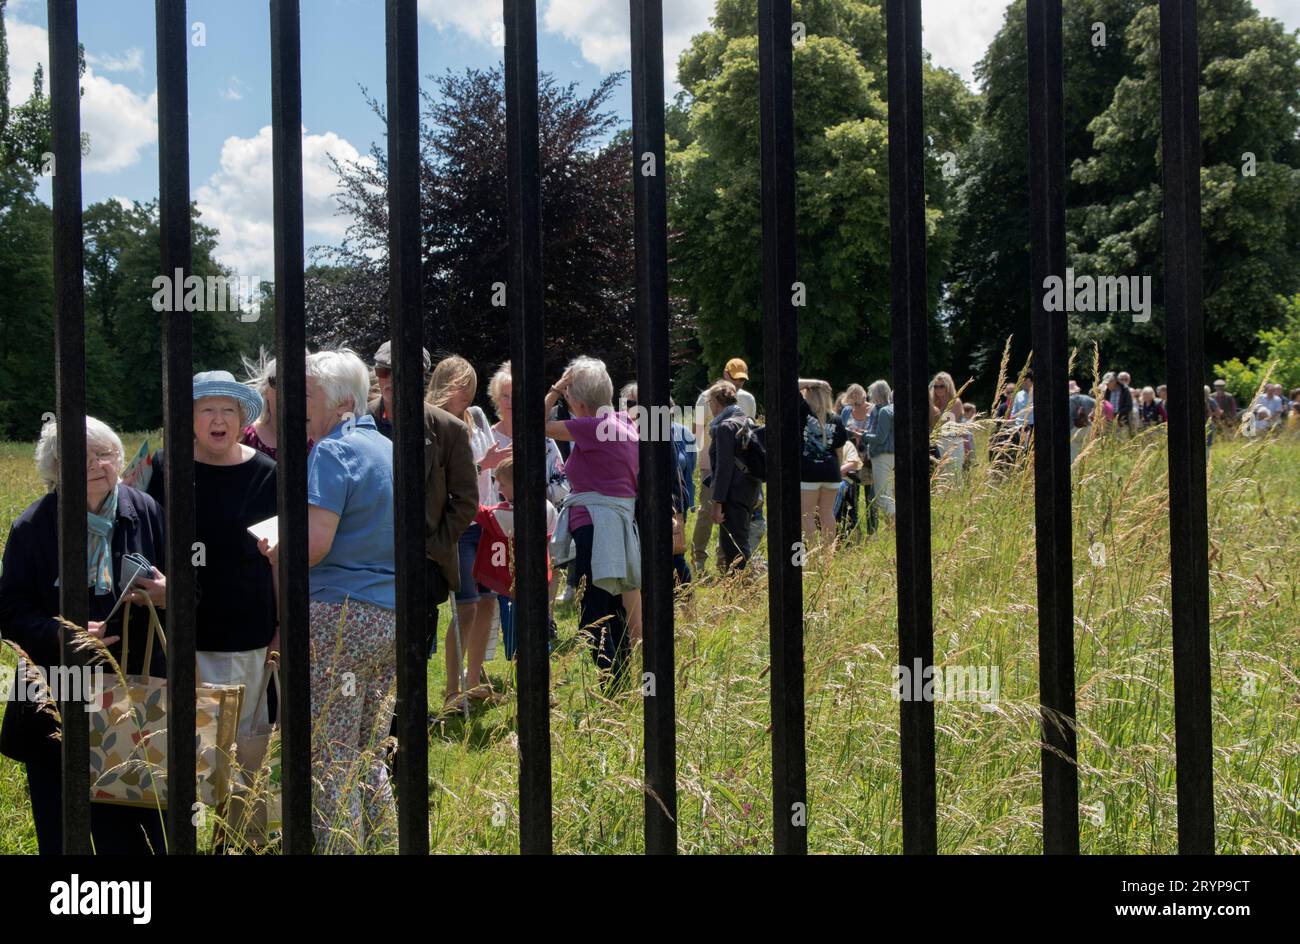 The Hospital of St Cross and Almshouse of Noble Poverty annual summer fete thats has taken place for over 150 years. About 2,000 people attended in 2022. Local visitors queuing up waiting to be allowed in. Winchester, Hampshire, England 25th June 2022.  2020s UK HOMER SYKES Stock Photo